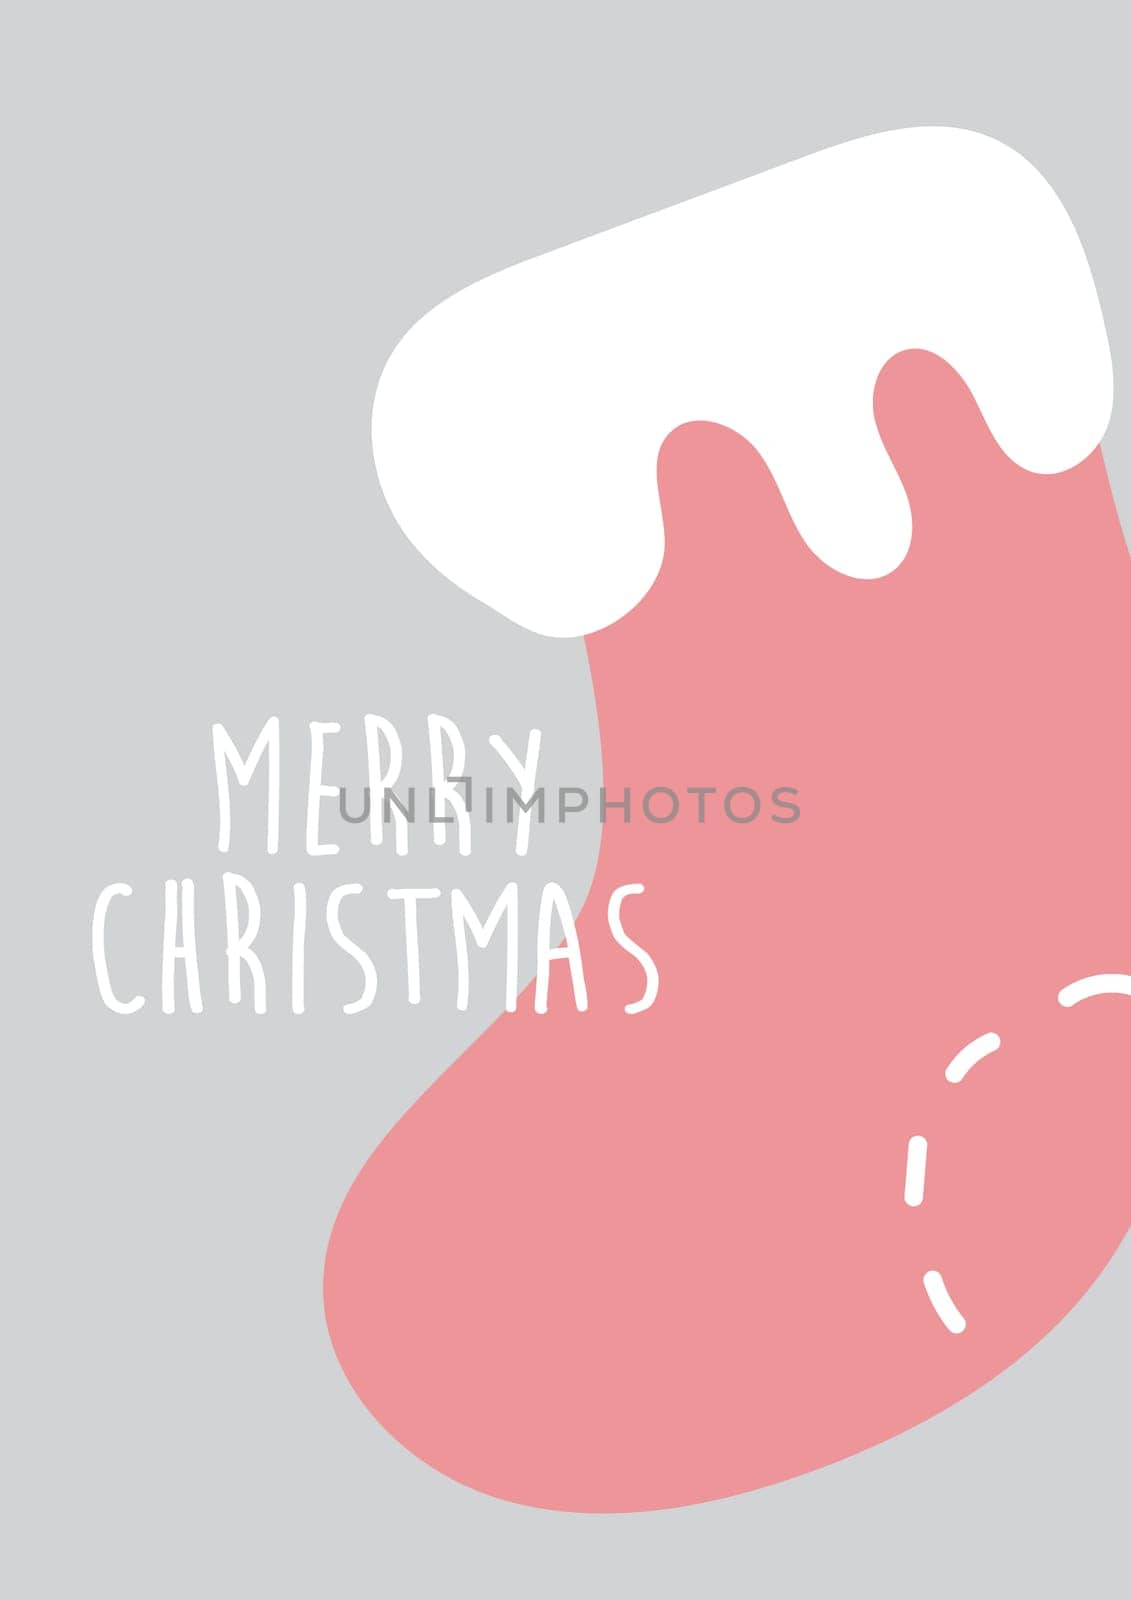 Merry Christmas greeting card design with stocking element by natali_brill